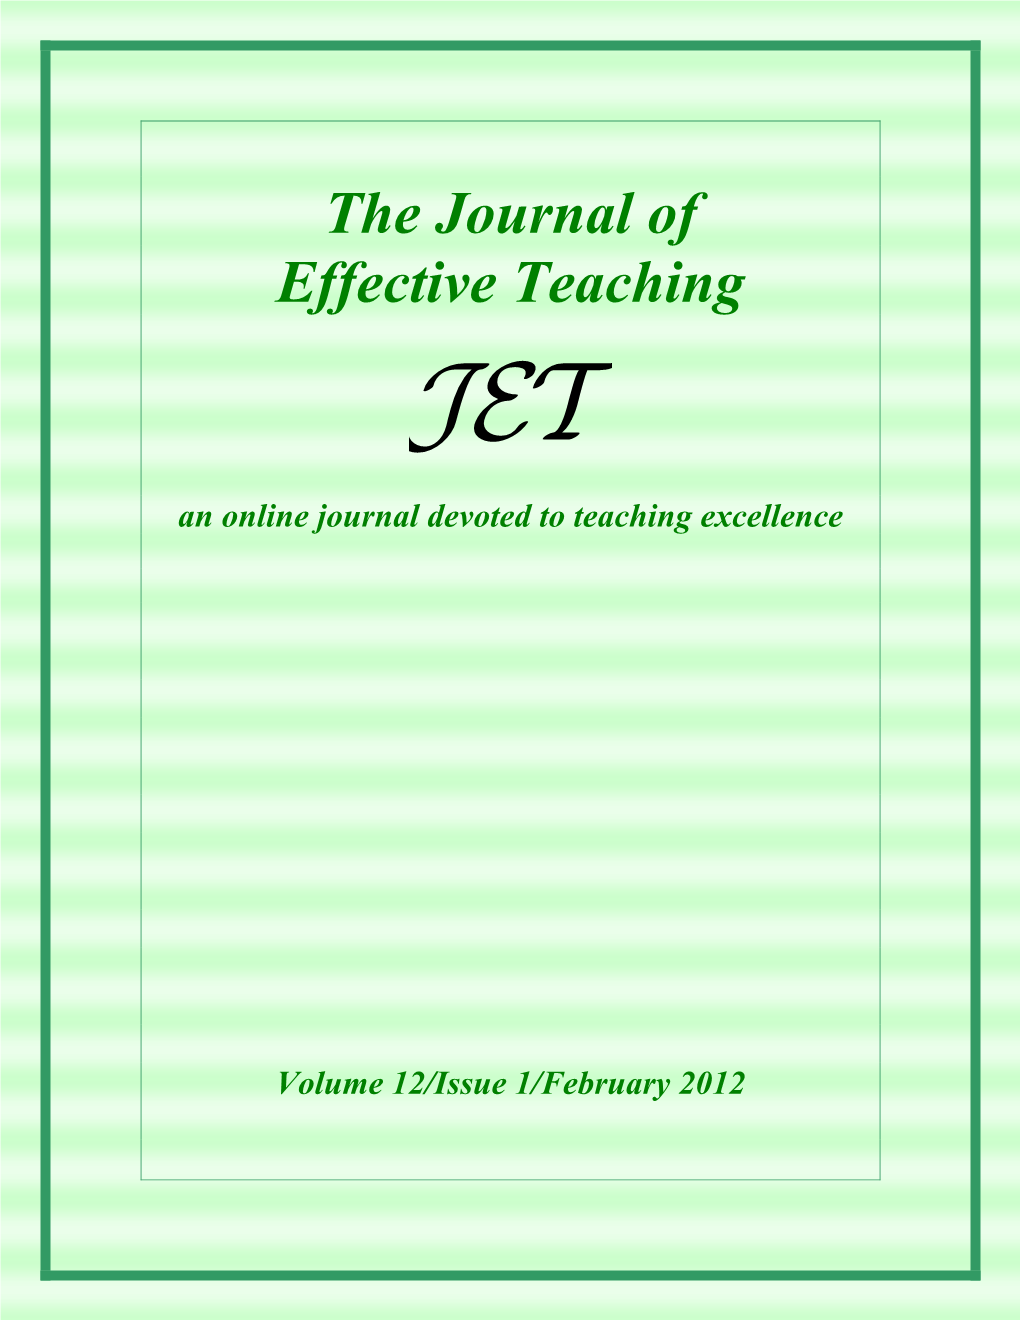 12/Issue 1/February 2012